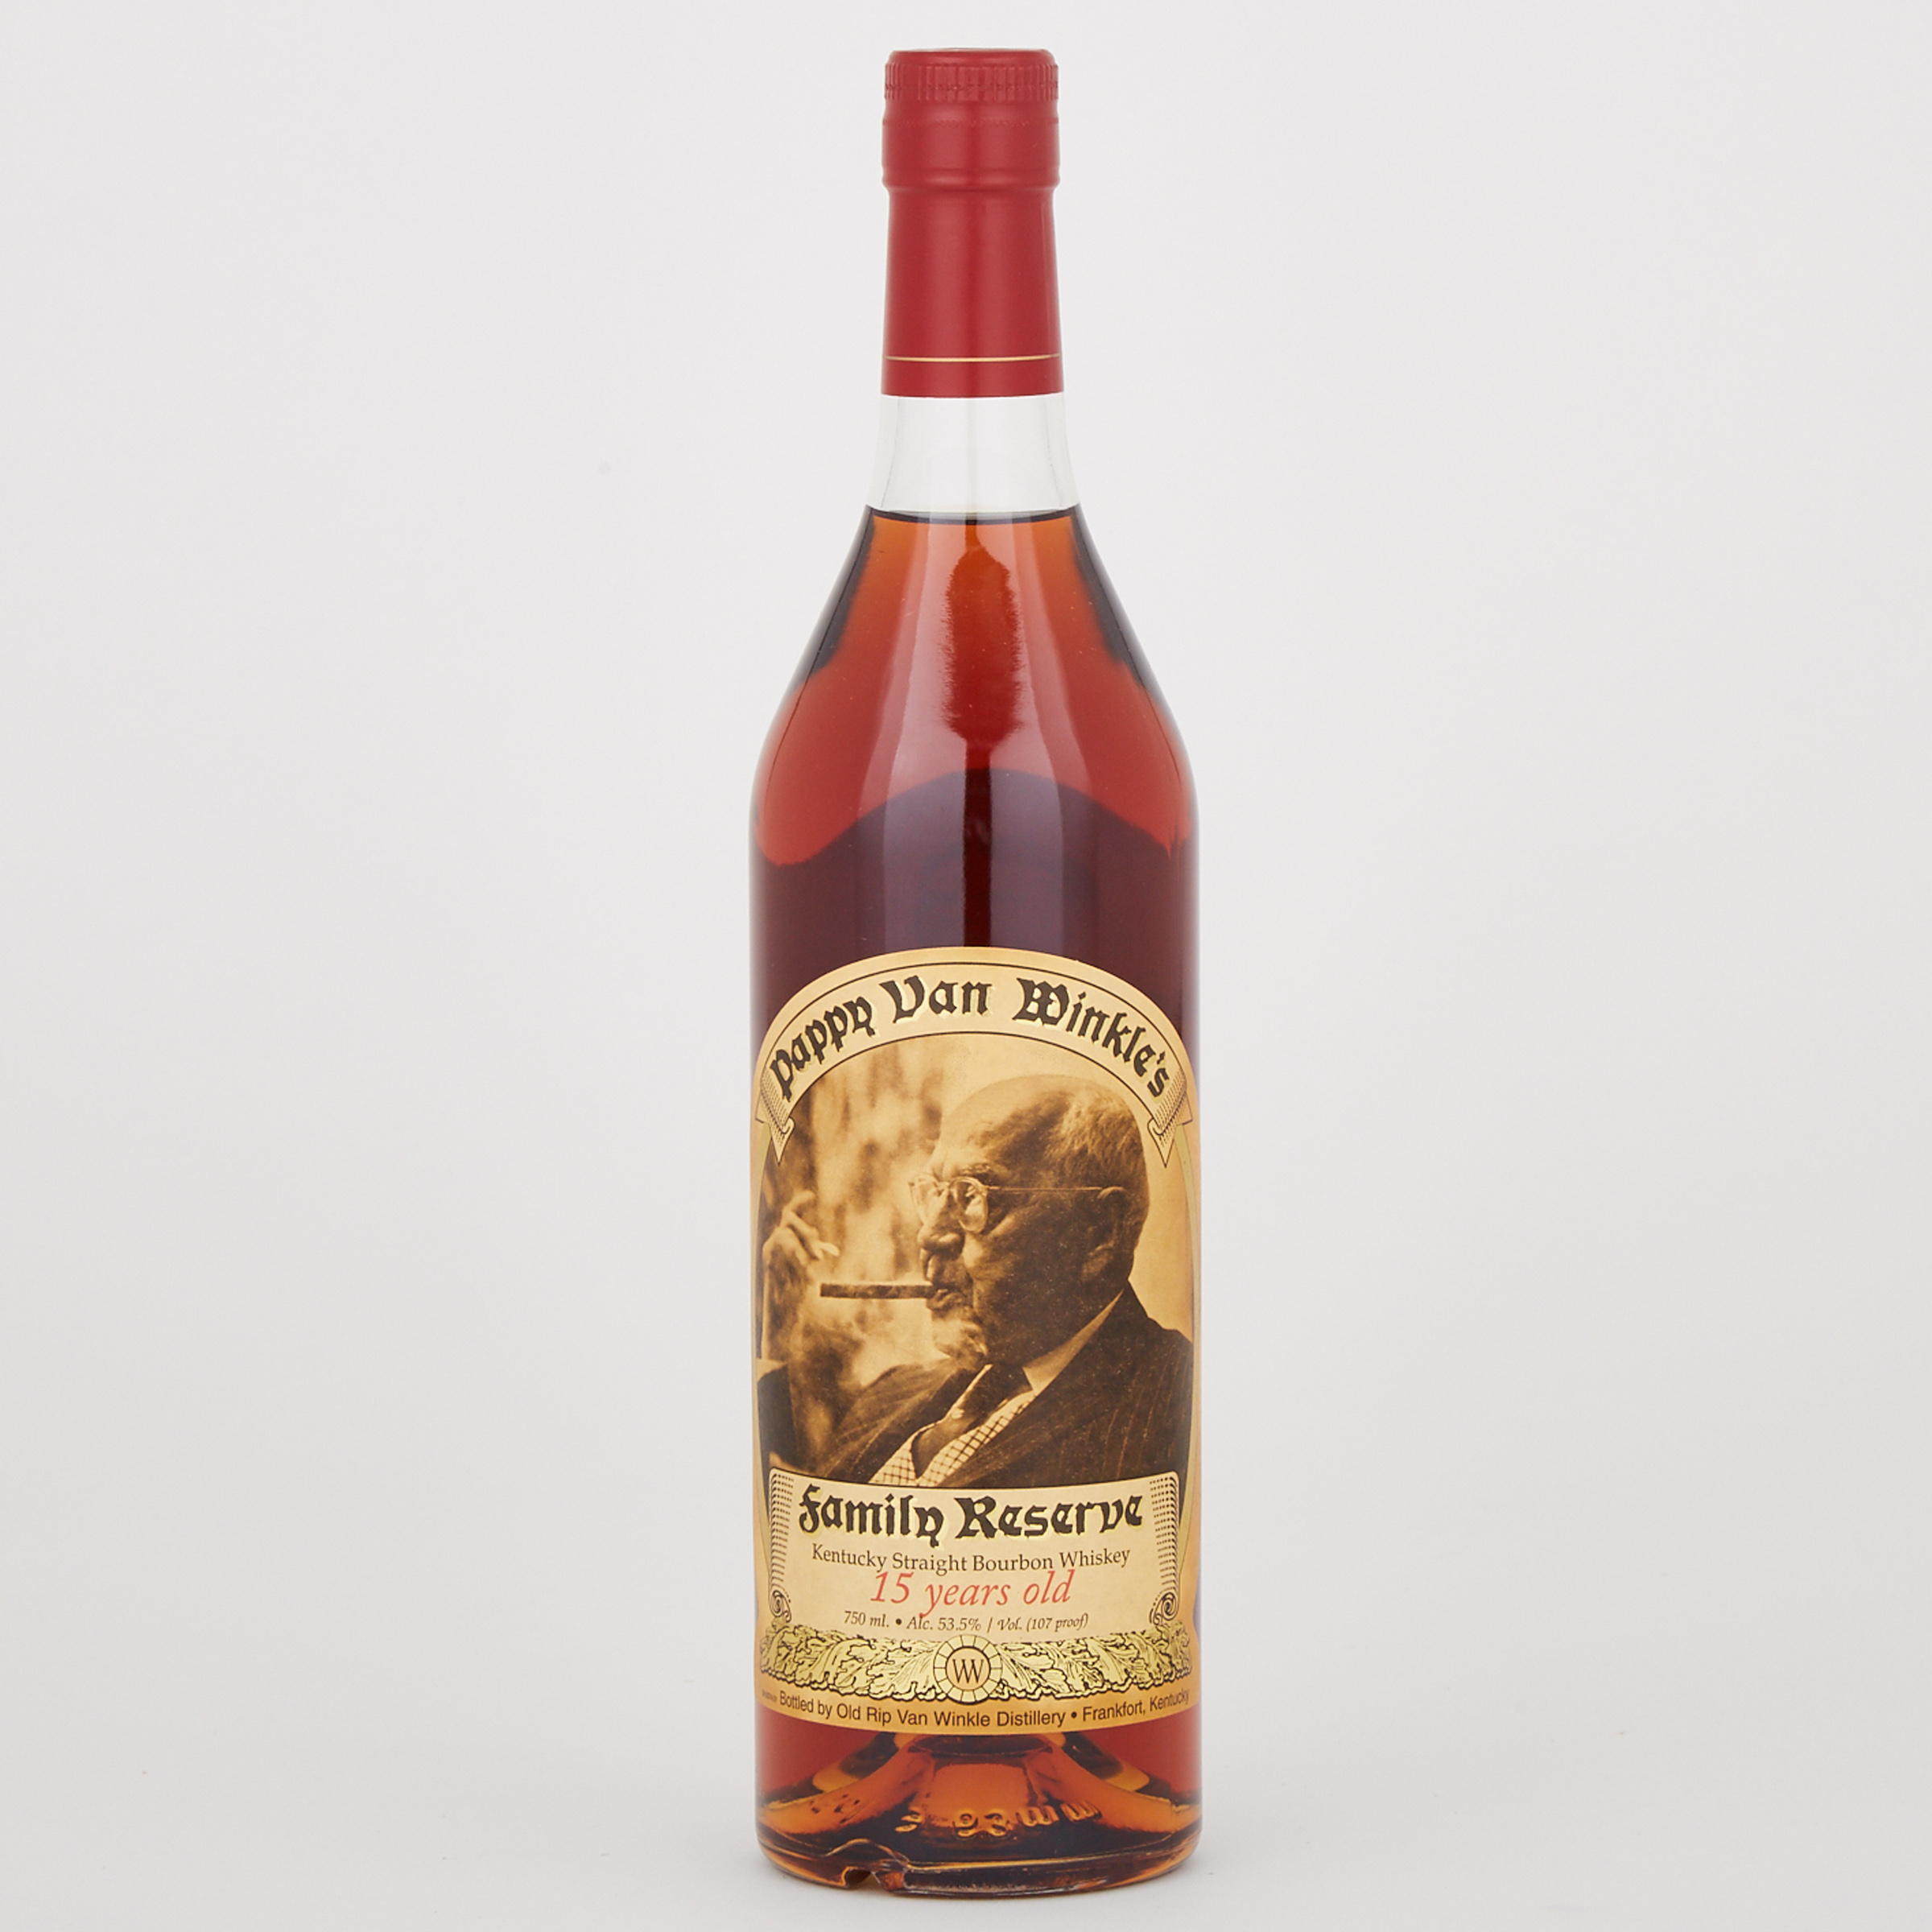 PAPPY VAN WINKLE FAMILY RESERVE KENTUCKY STRAIGHT BOURBON WHISKEY 15 YEARS (ONE 750 ML)PAPPY VAN WINKLE’S FAMILY RESERVE KENTUCKY STRAIGHT BOURBON  WHISKEY 15 YEARS (ONE 750 ML)